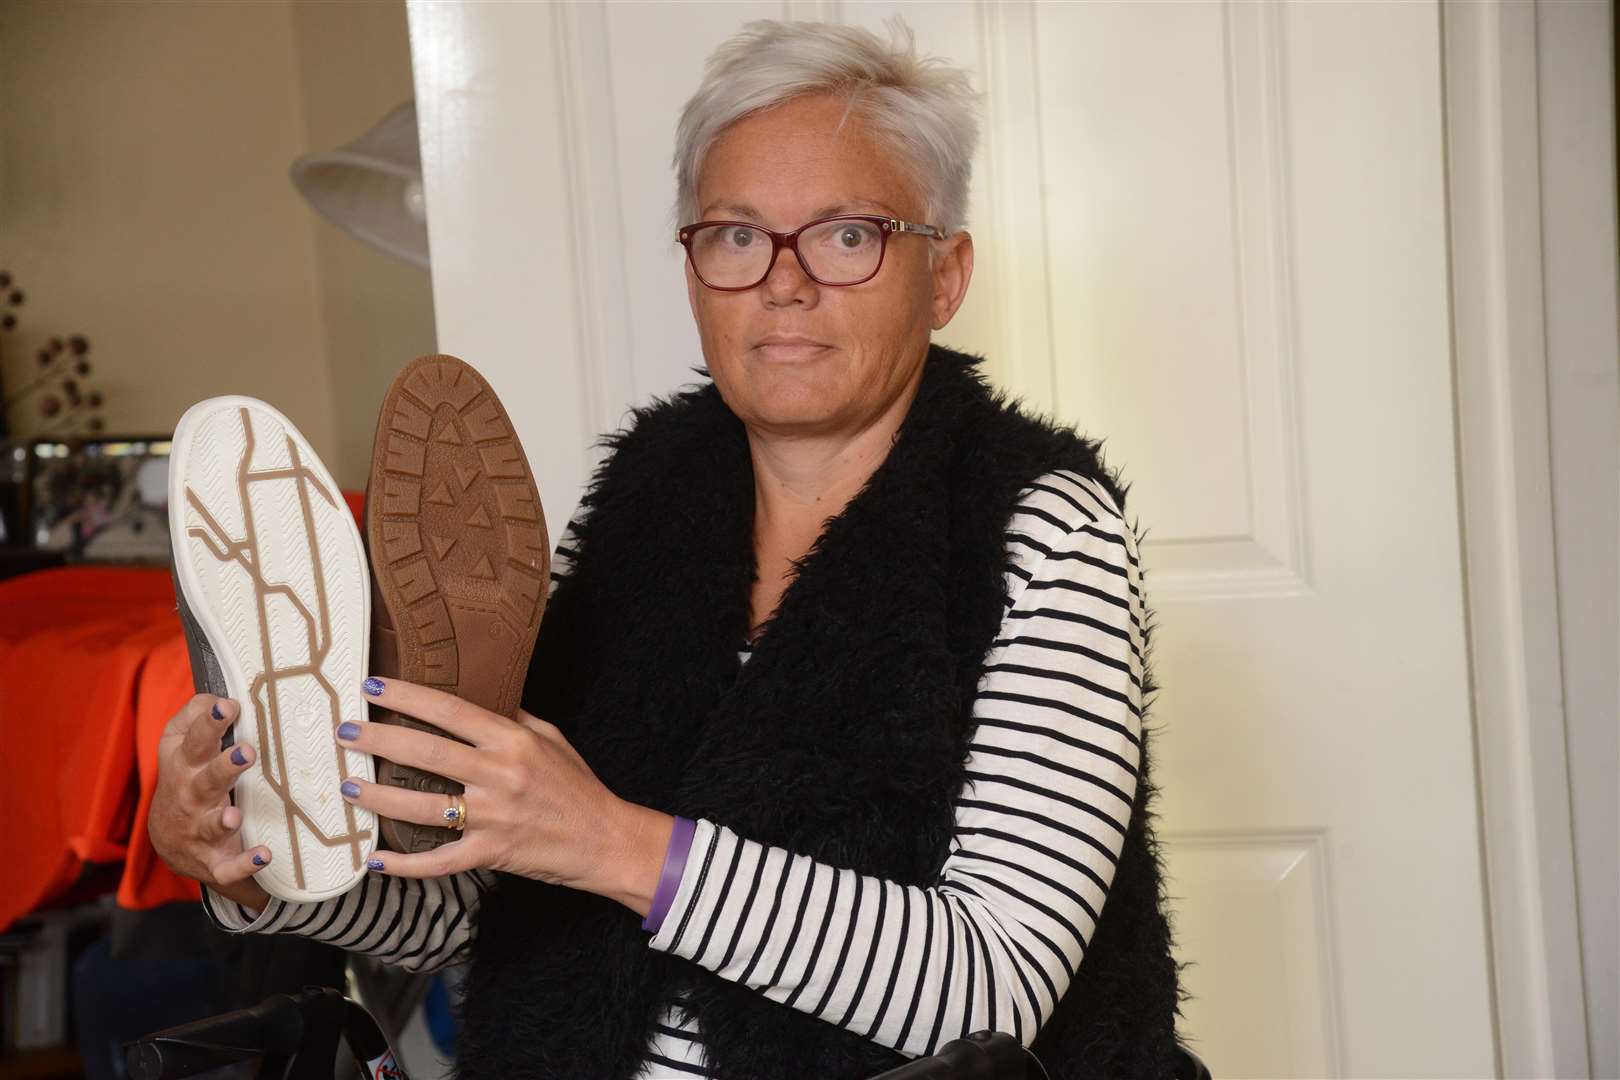 Jo O'Callaghan has made friends through an odd shoe swapping community Picture: Gary Browne